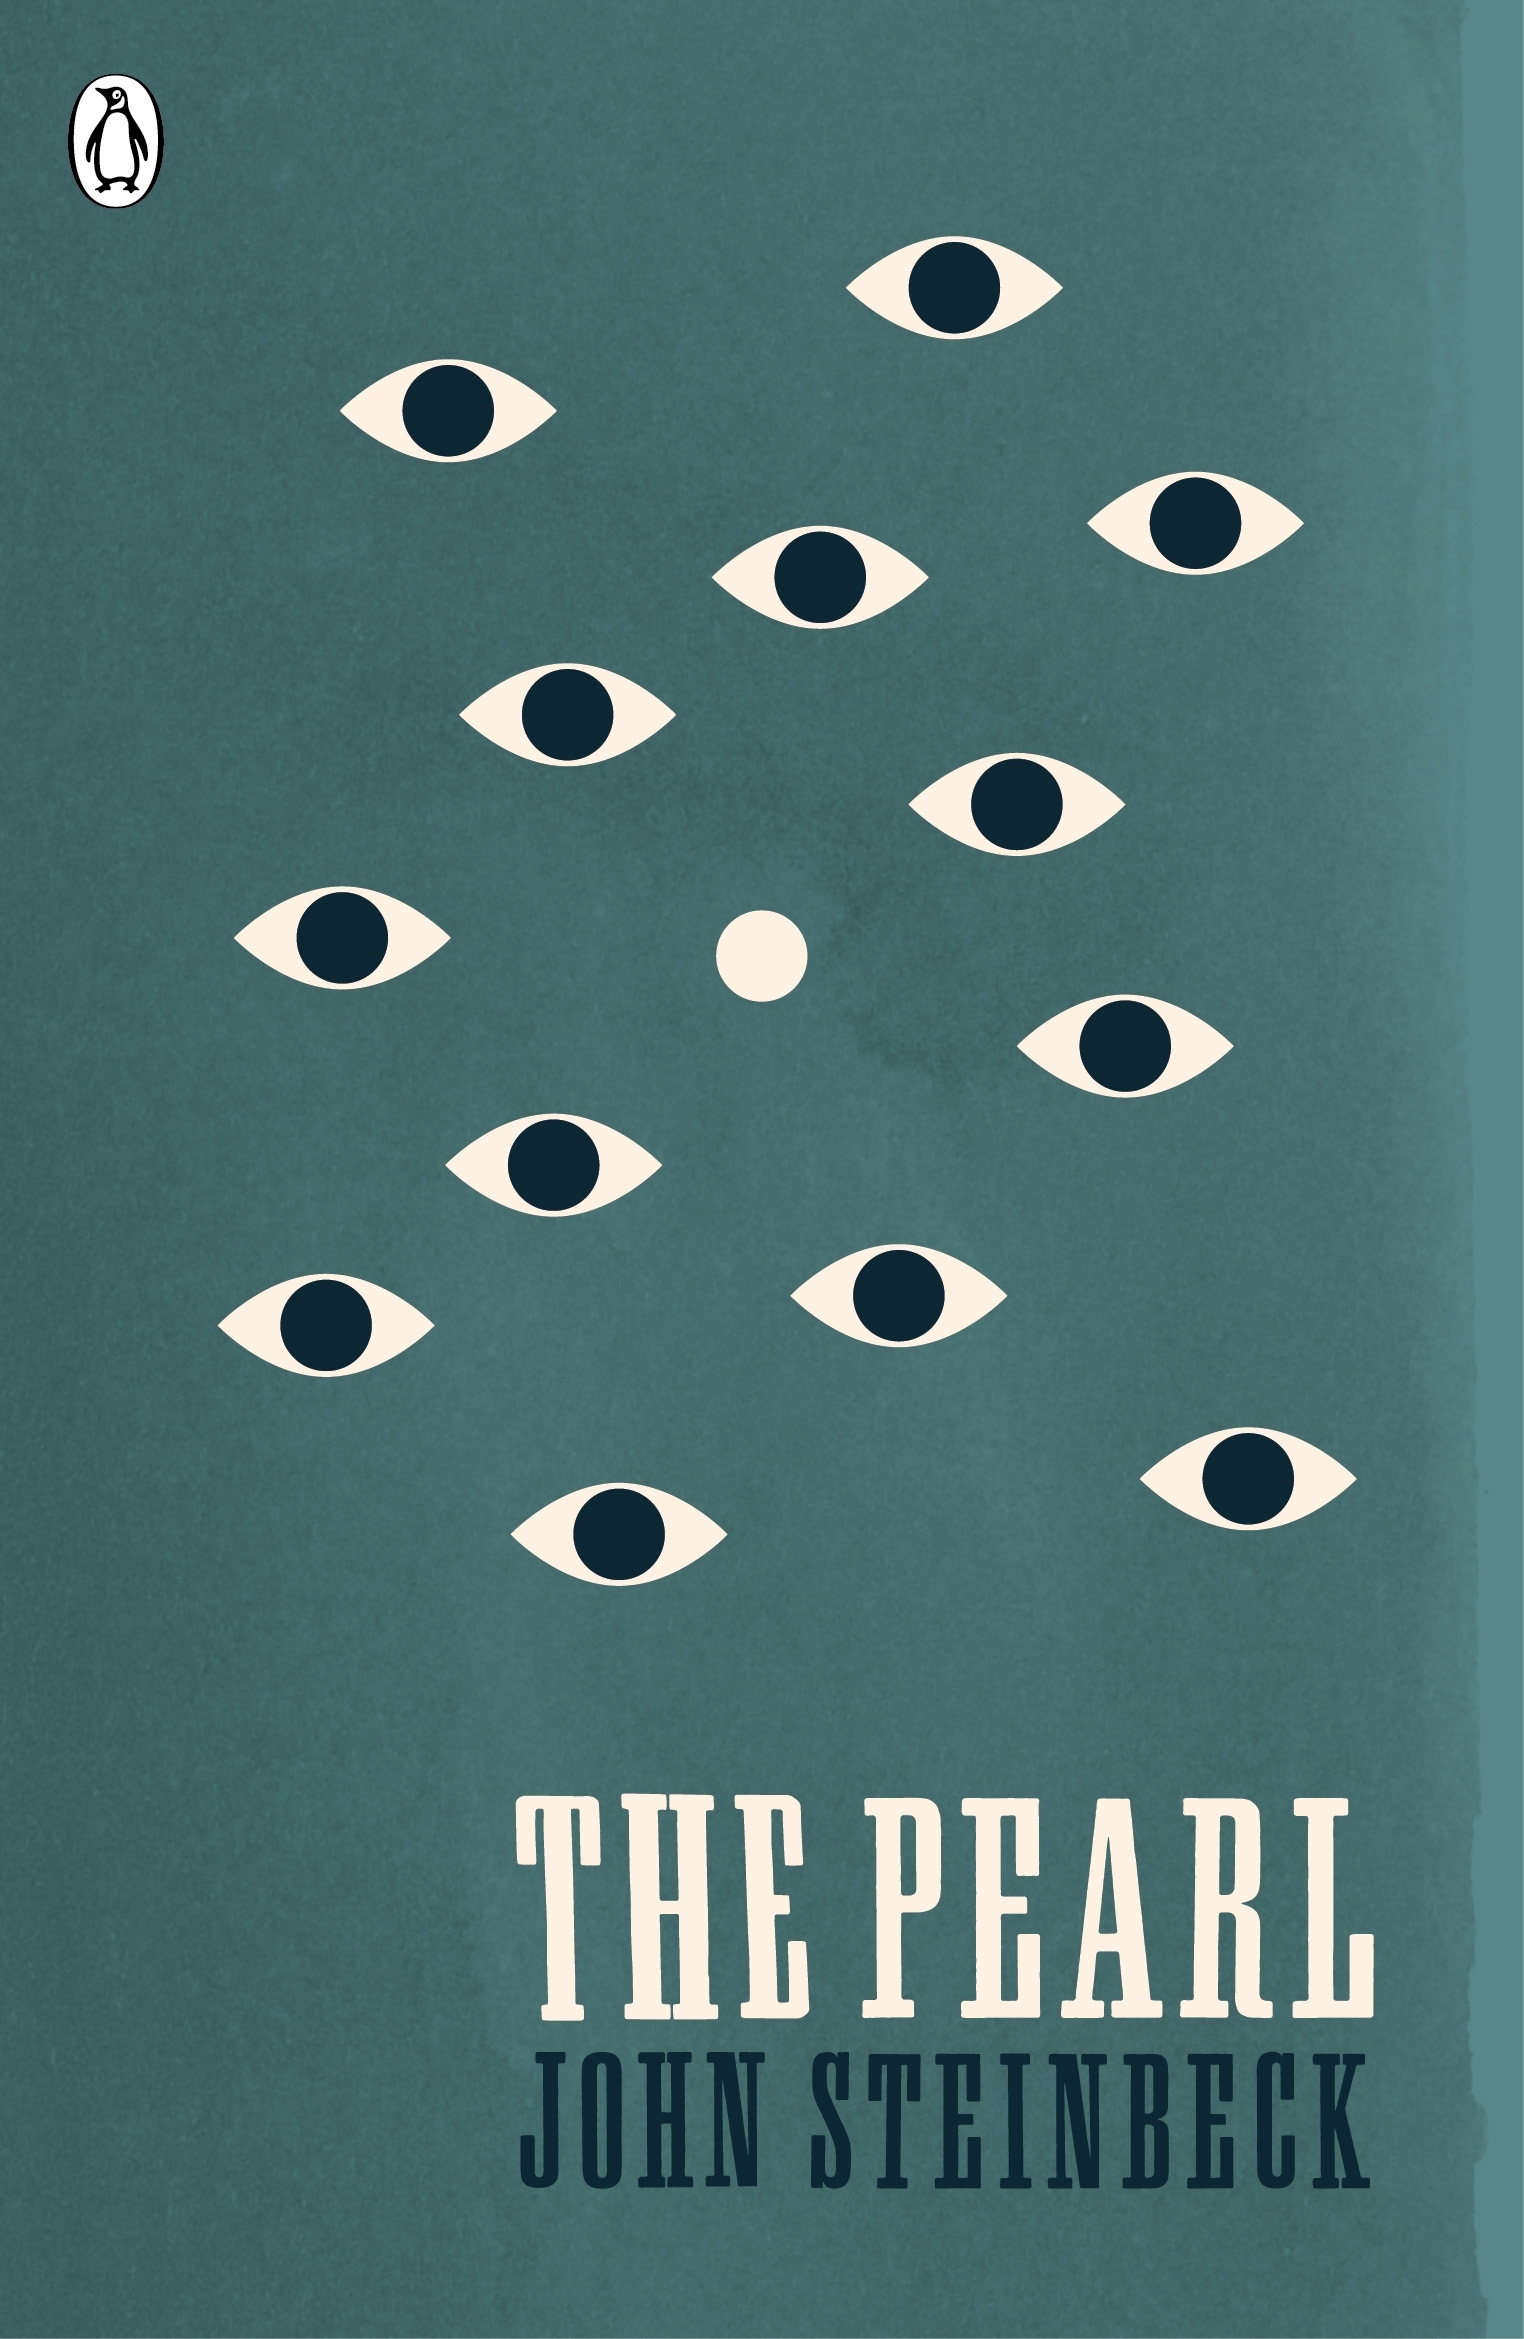 essay the pearl by john steinbeck